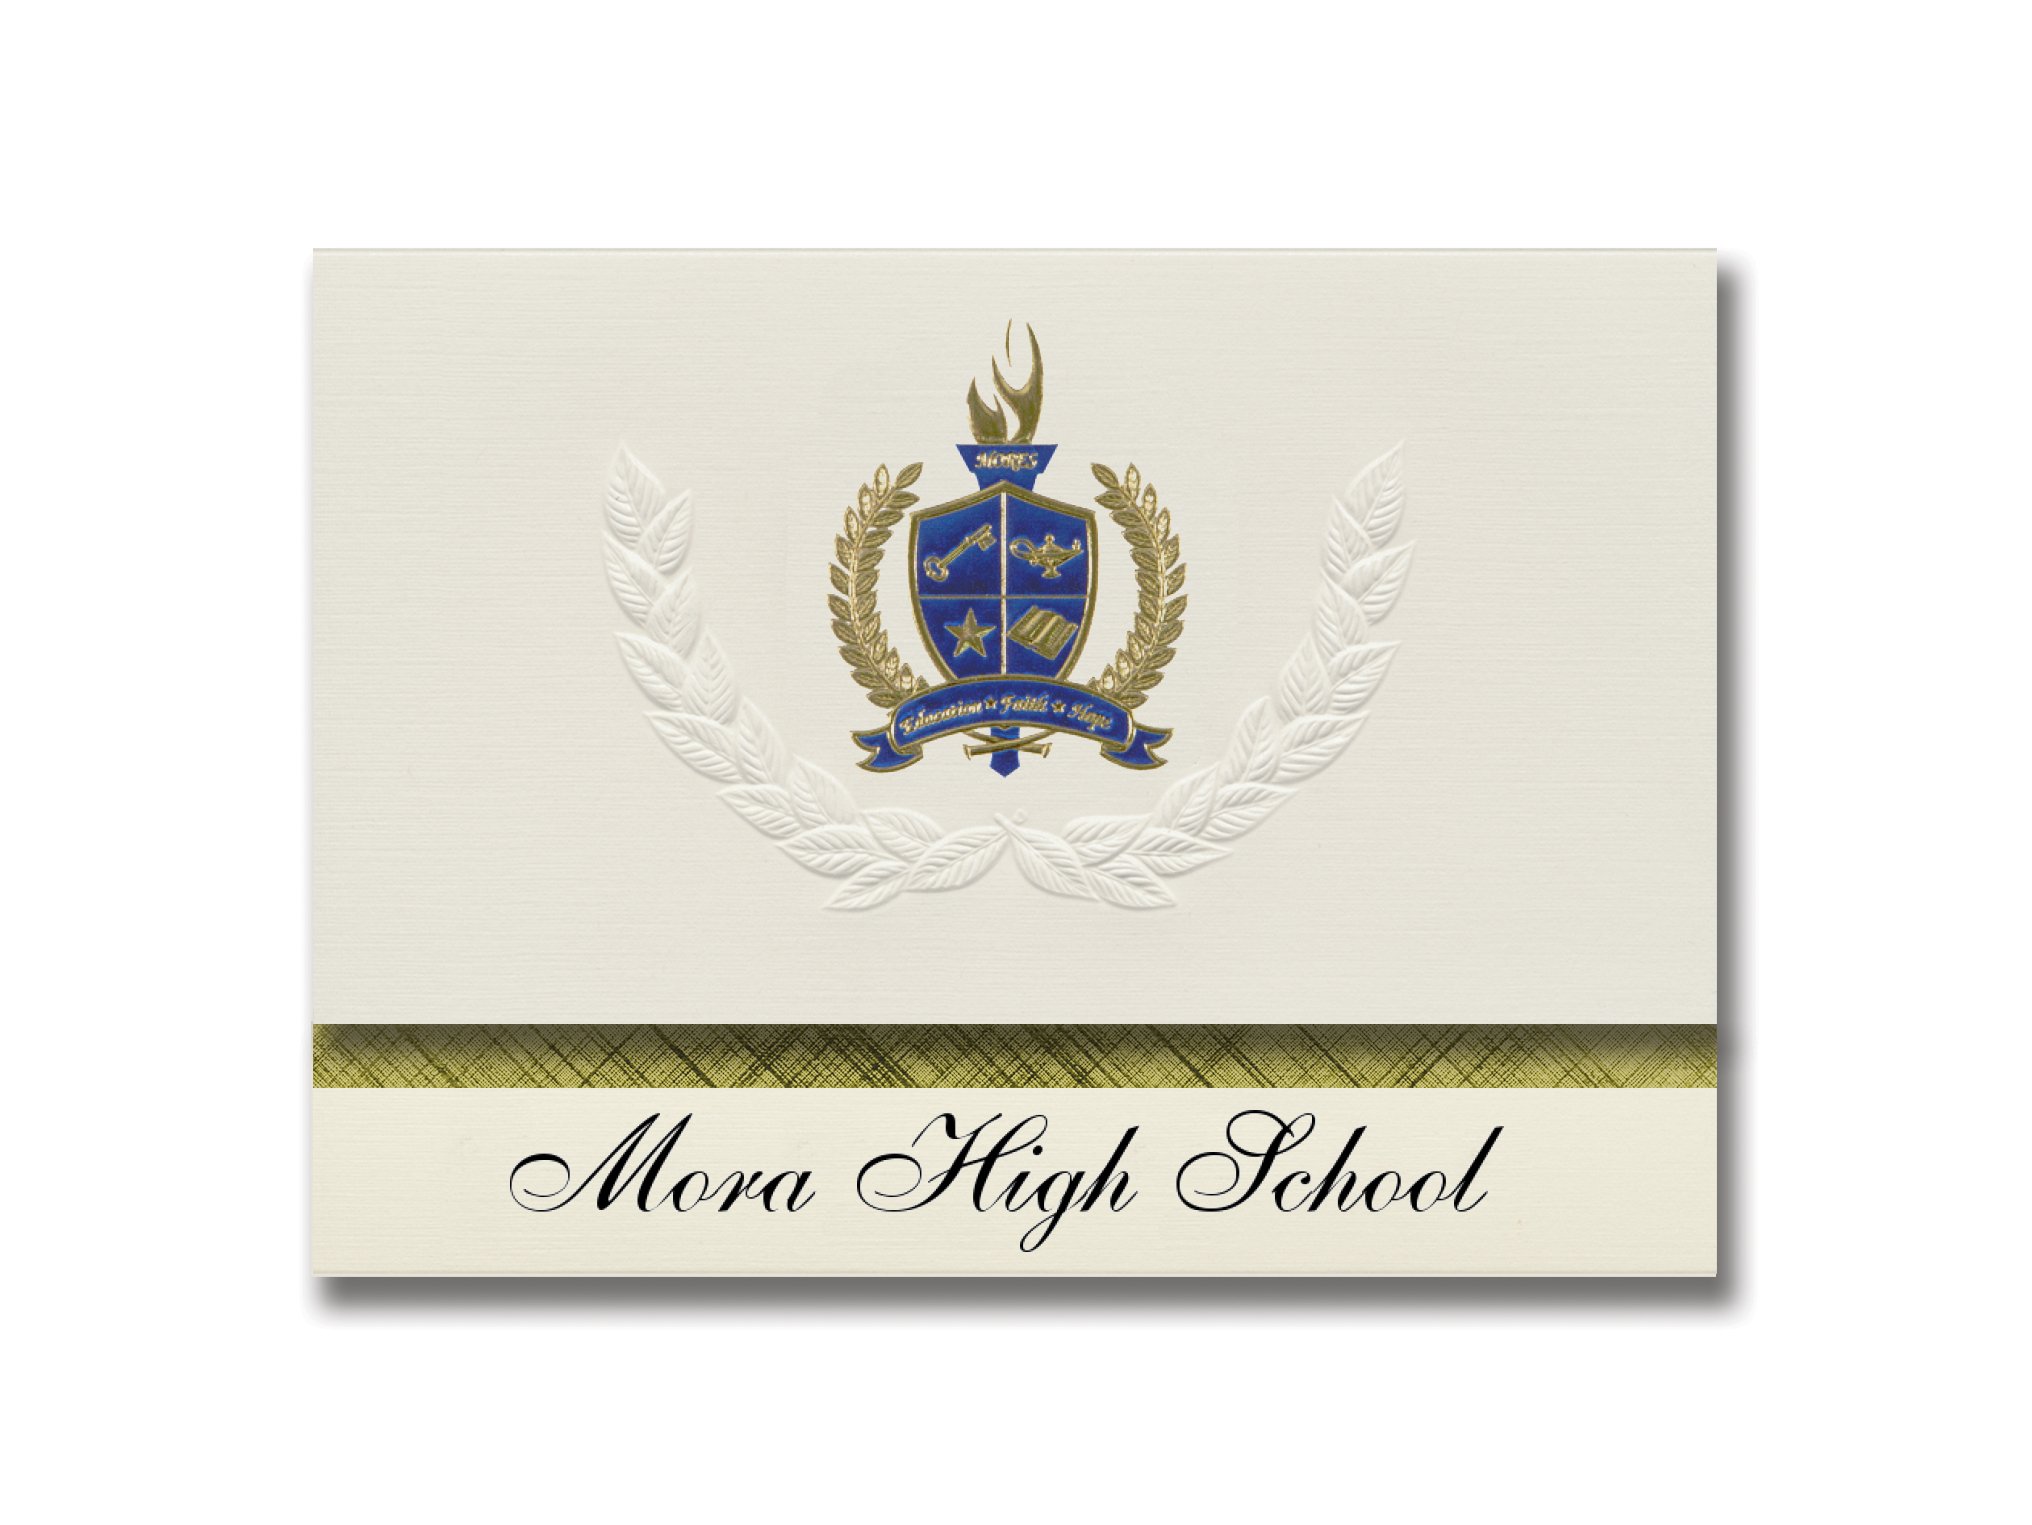 Signature Announcements Mora High School (Mora, NM) Graduation Announcements, Presidential style, Elite package of 25 with Gold & Blue Metallic Foi...